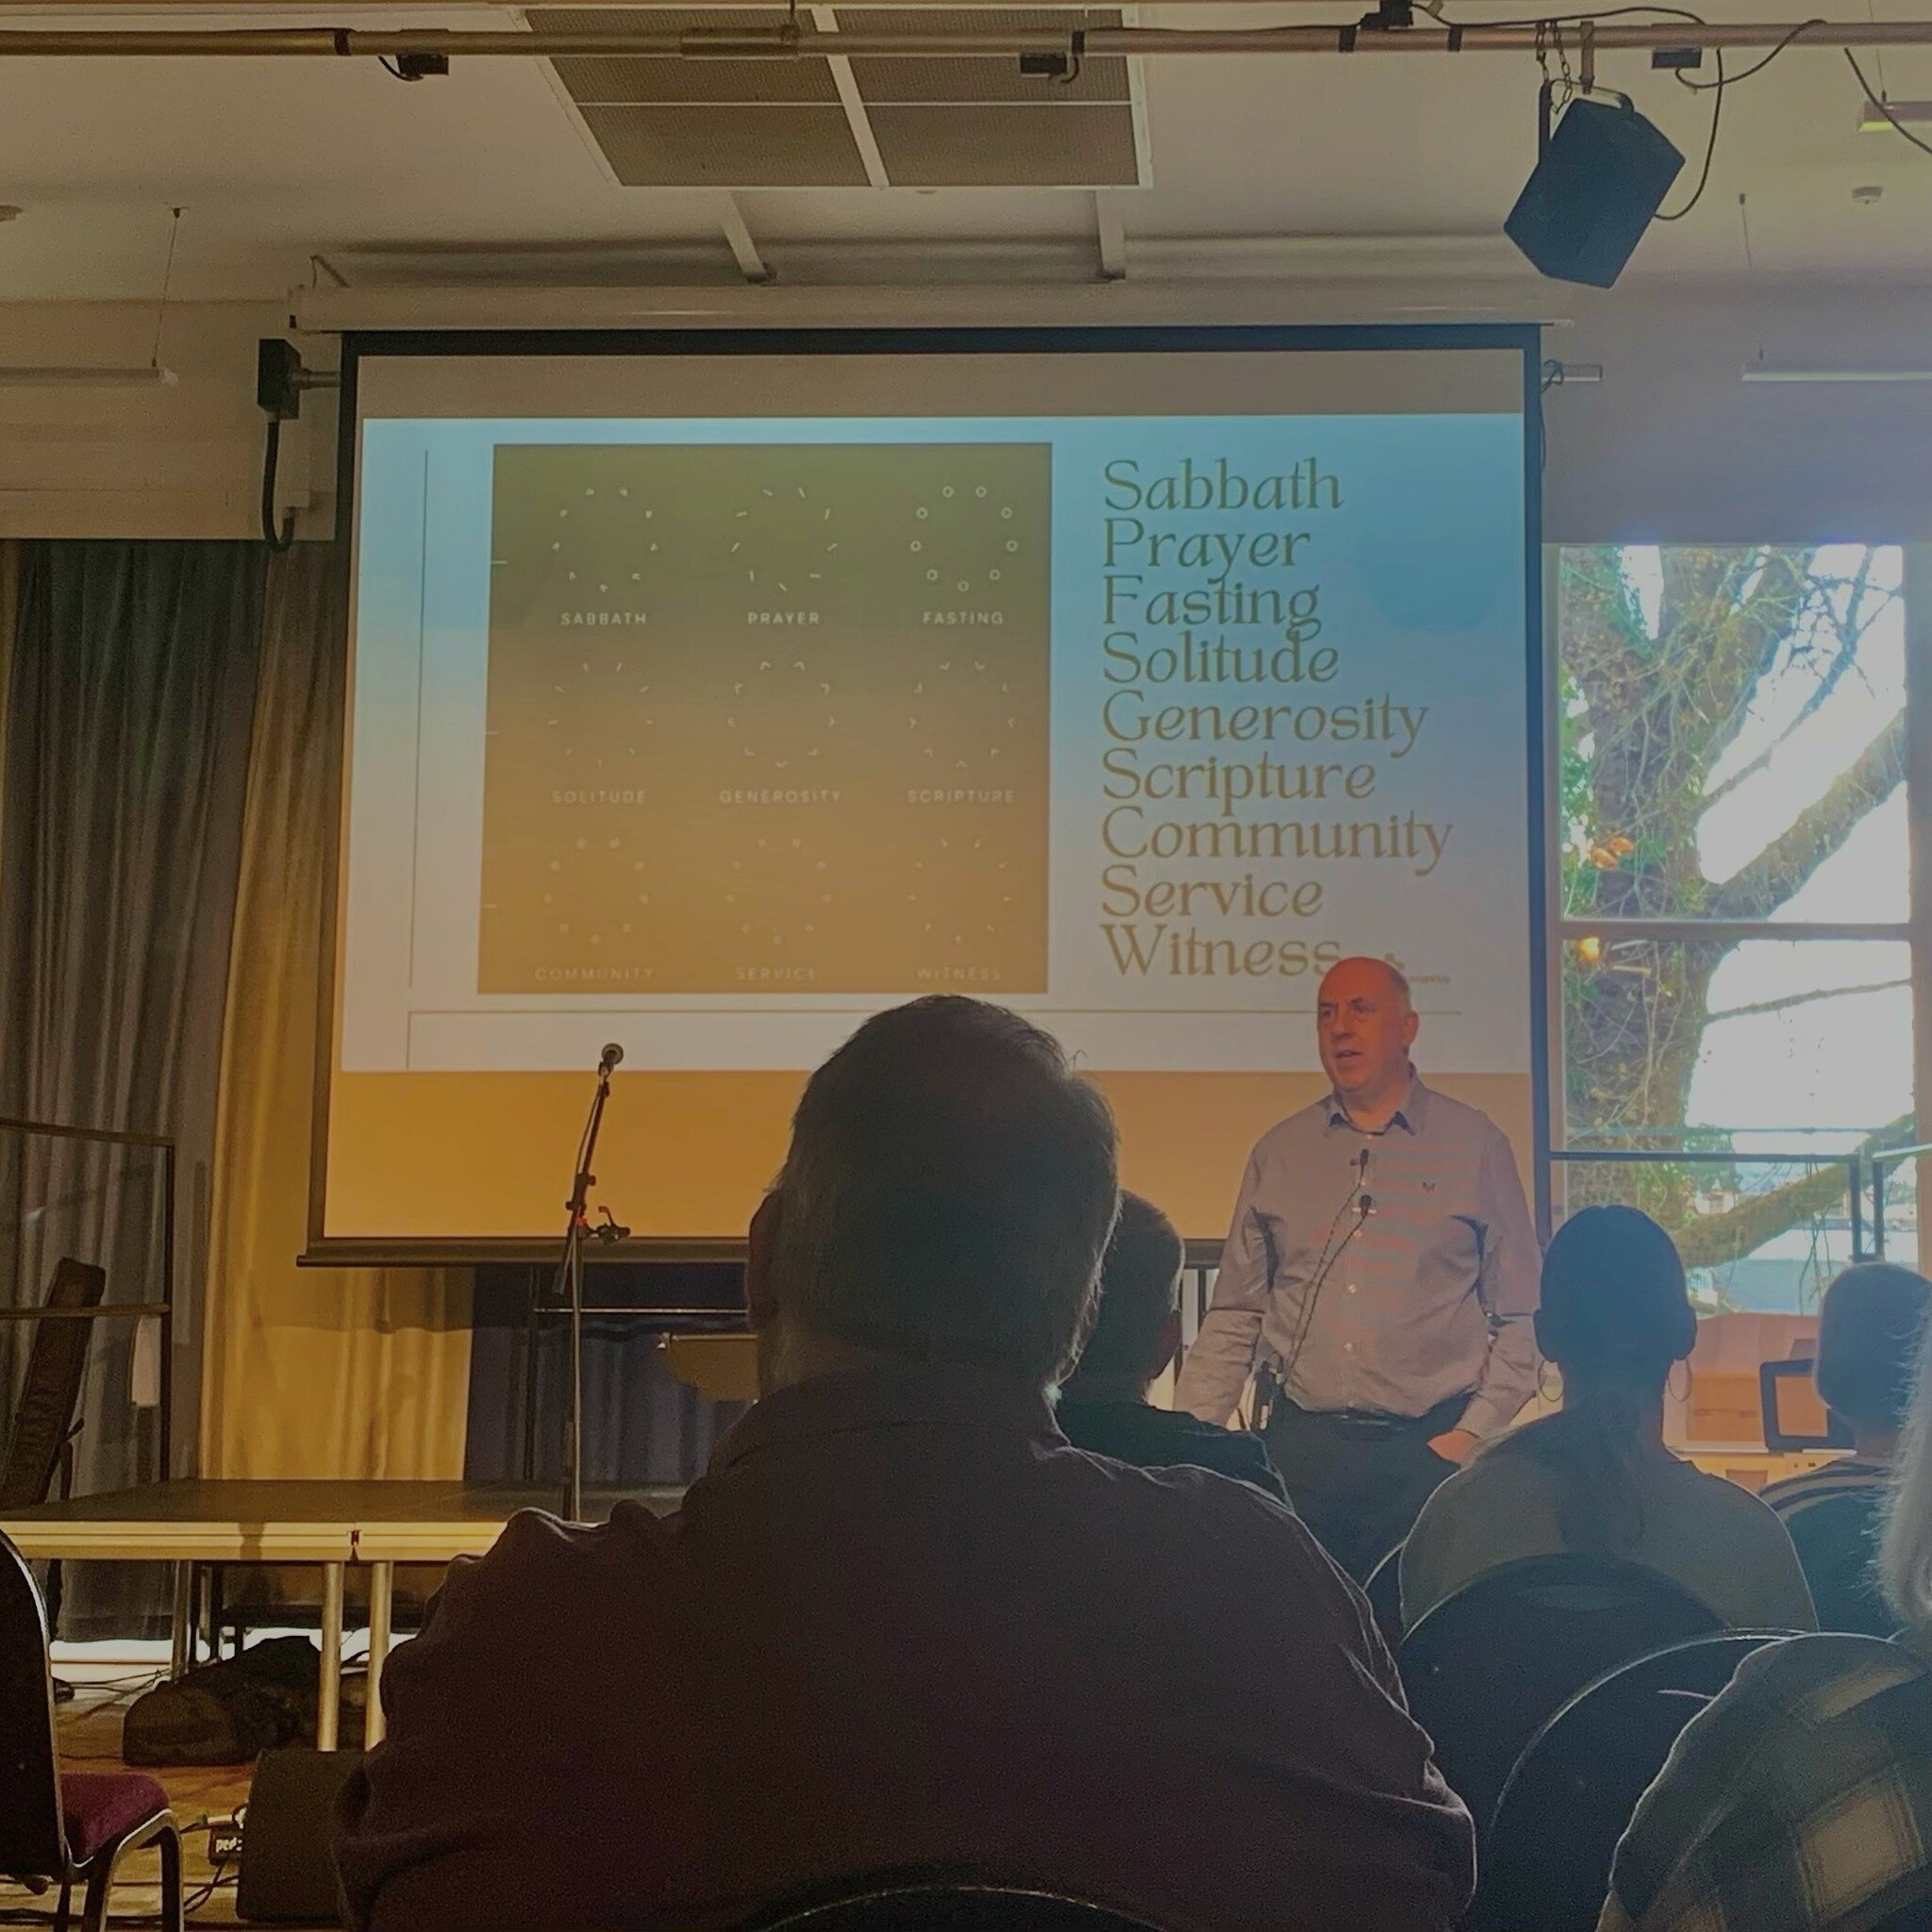 We absolutely loved having Graham preach this morning following on from our &lsquo;Headship&rsquo; series where we looked at the theme of &lsquo;who do you follow?&rsquo; in our personal journey of faith. 🌿

&rdquo;The crowds that went ahead of him 